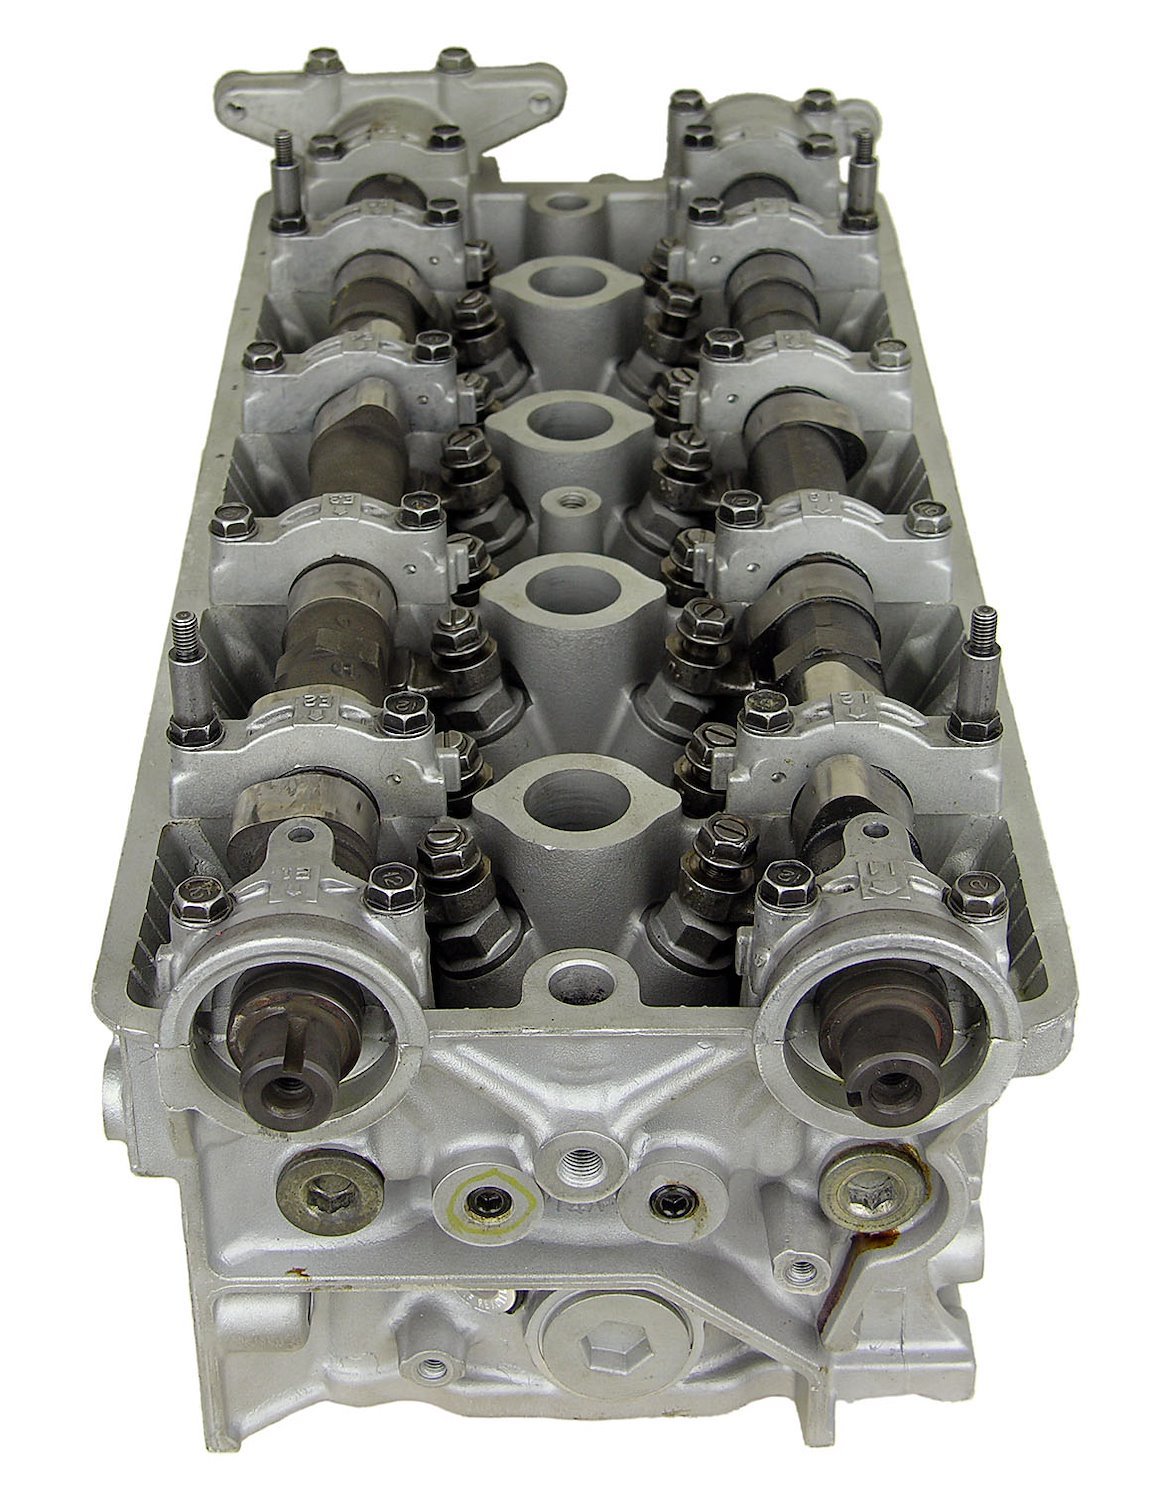 Remanufactured Cylinder Head for 1992-1996 Honda Prelude with 2.3L L4 H23A1